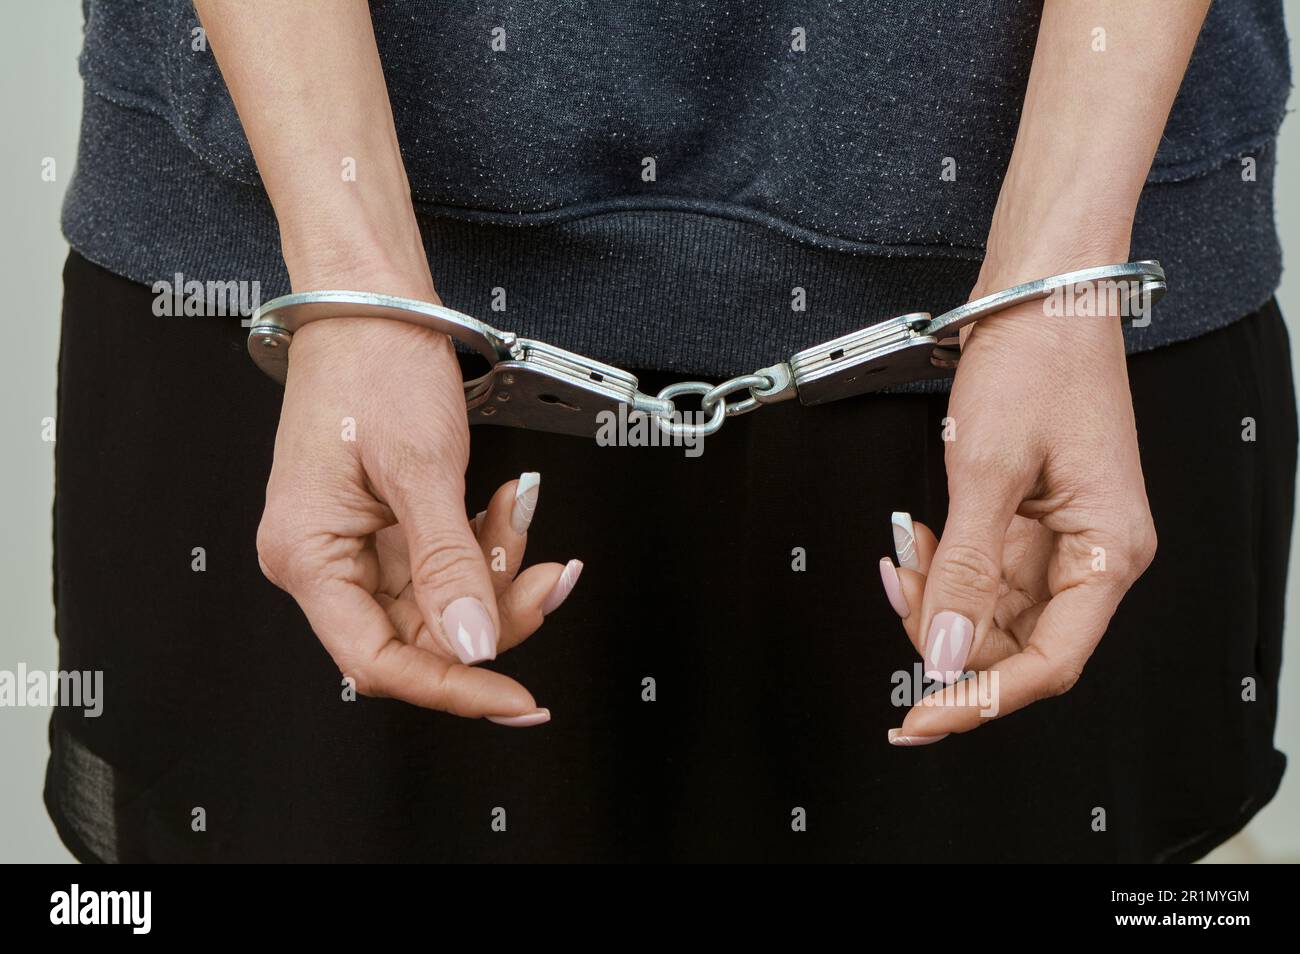 women's hands are handcuffed in close-up Stock Photo